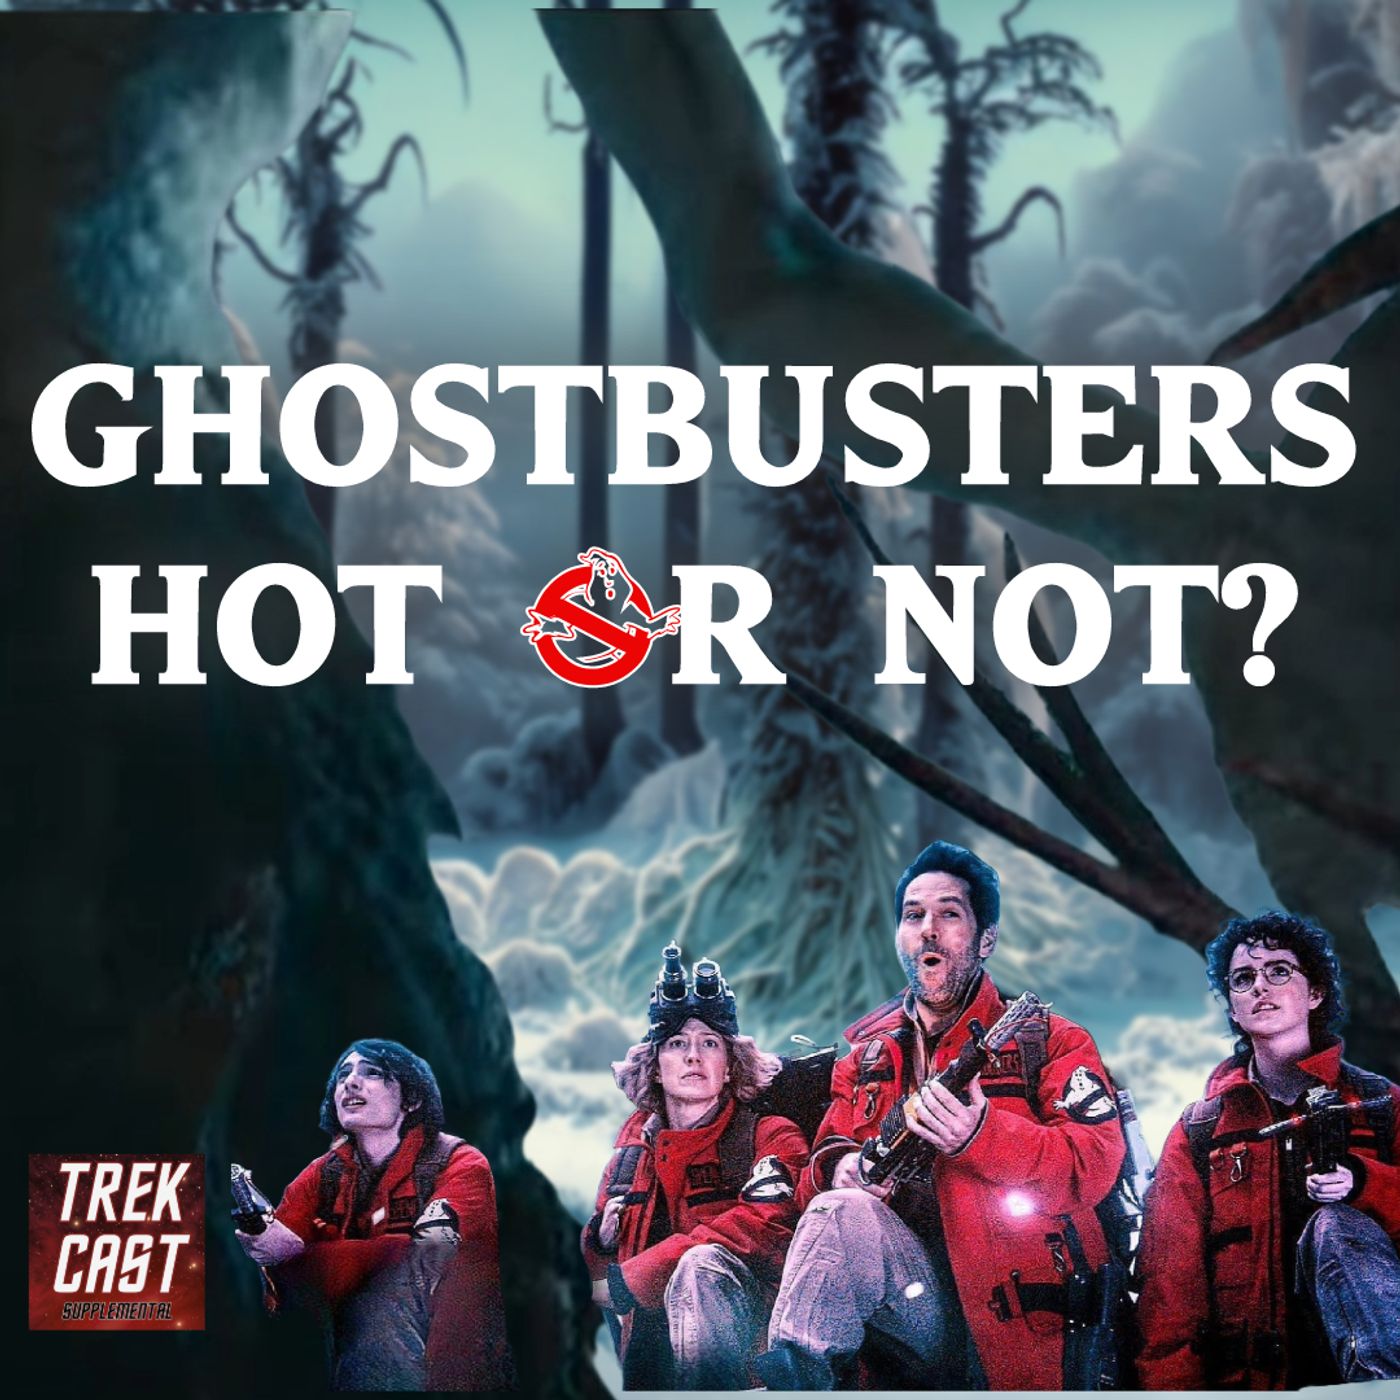 Trekcast Supplemental: Ghostbusters Hot or Not?